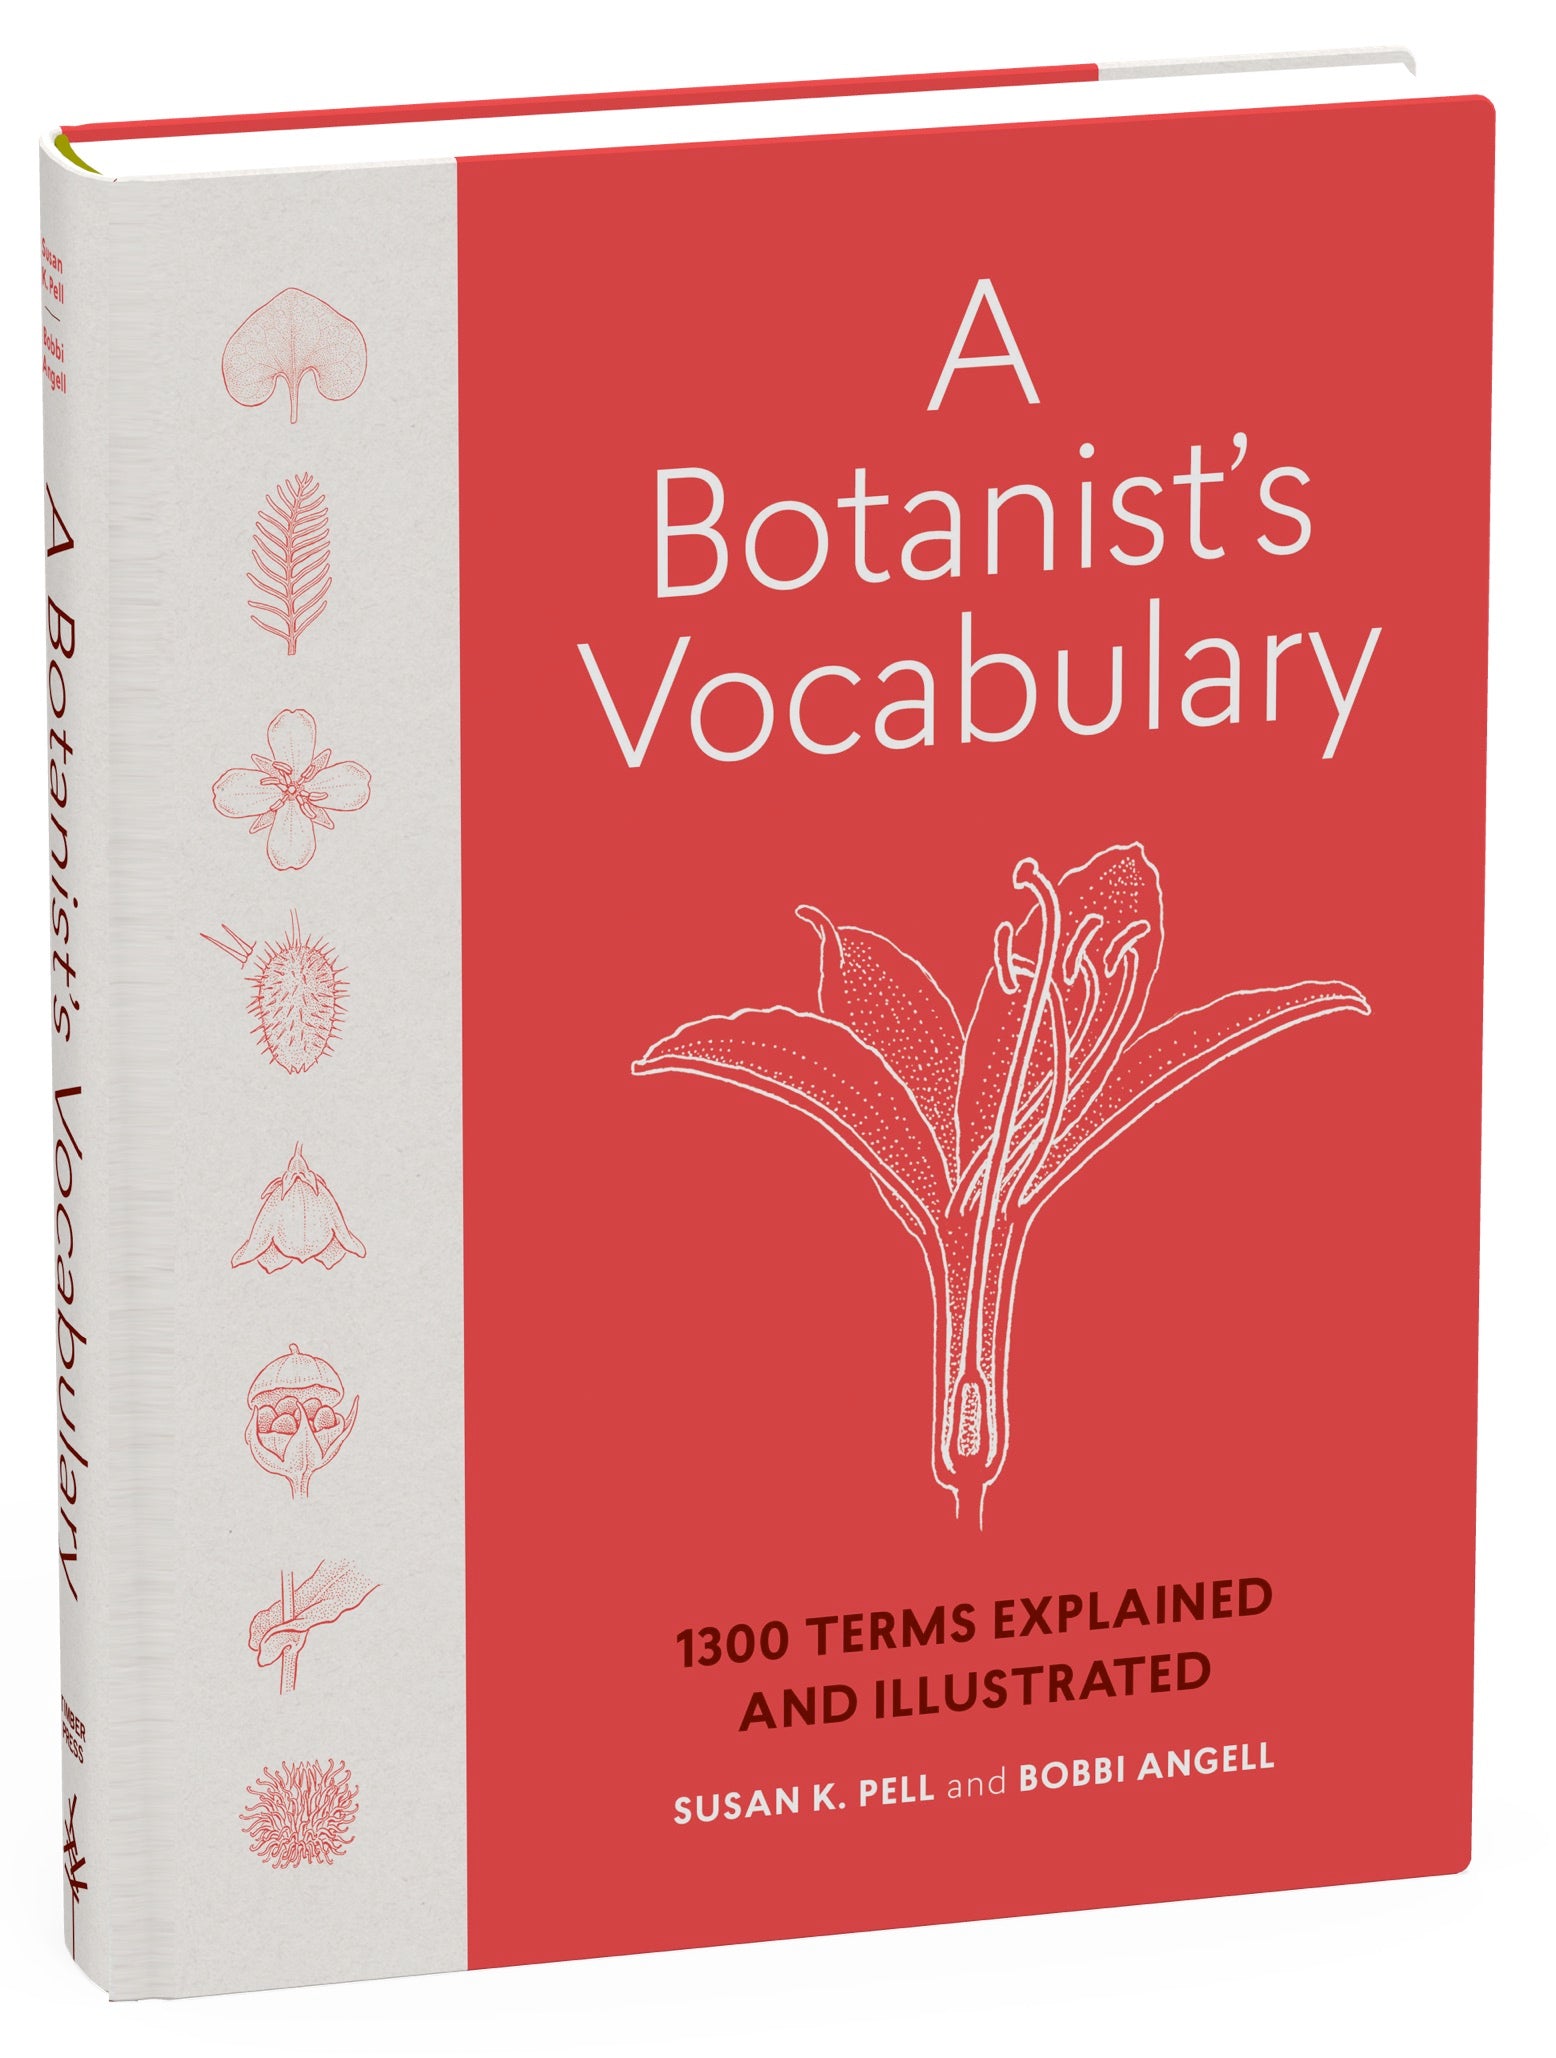 A red book with a white spine. There are illustrations of leaves, buds, and other plant parts on the cover.